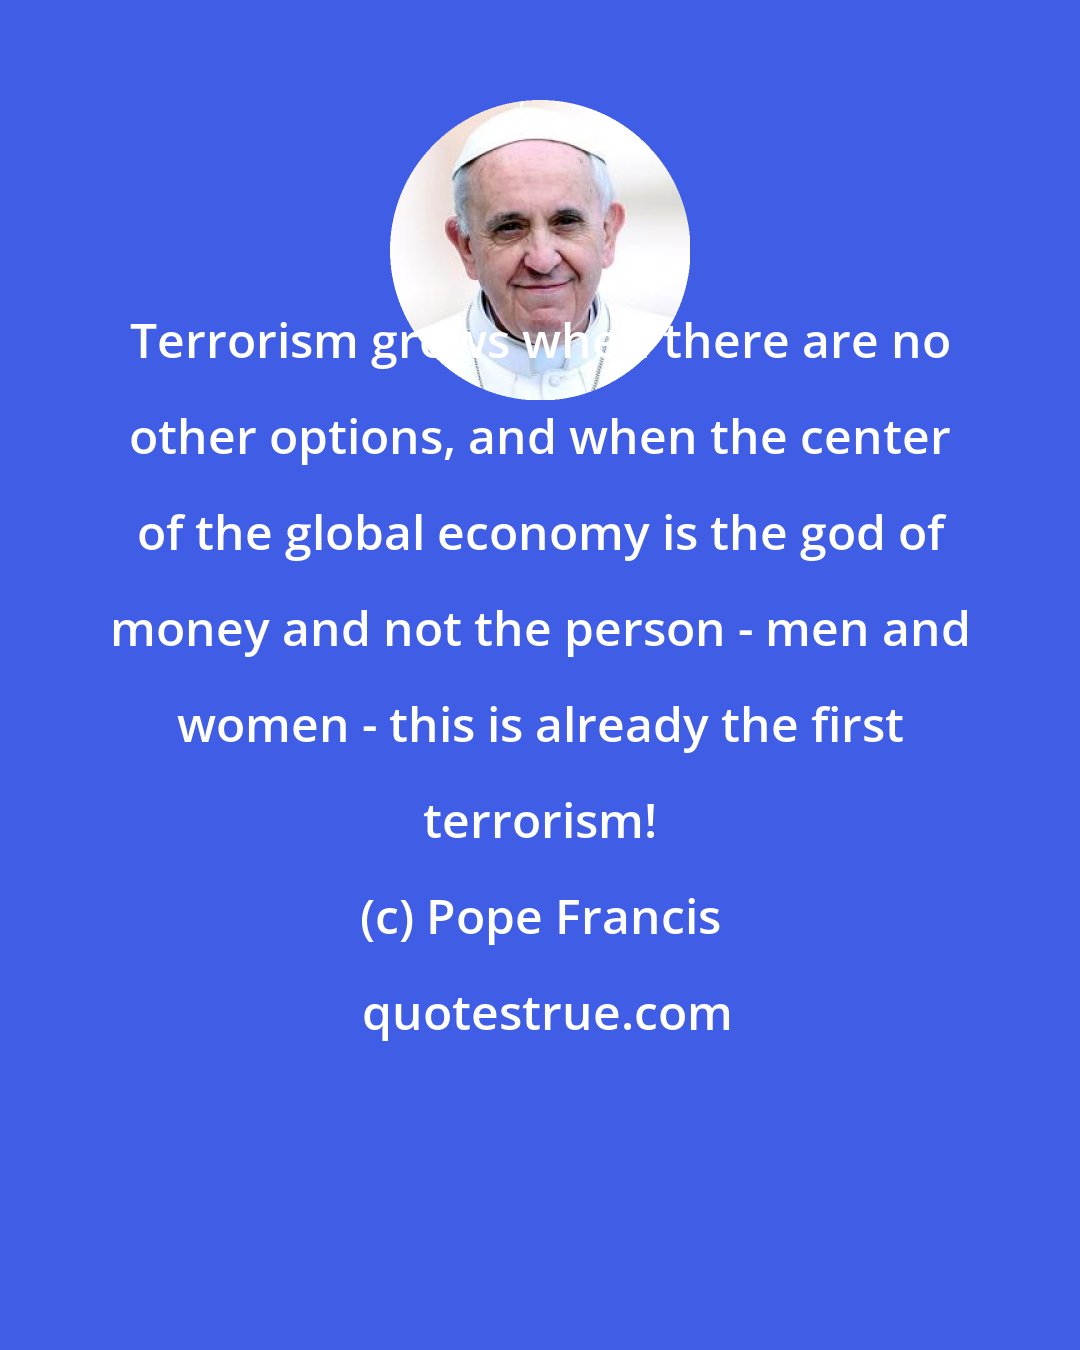 Pope Francis: Terrorism grows when there are no other options, and when the center of the global economy is the god of money and not the person - men and women - this is already the first terrorism!